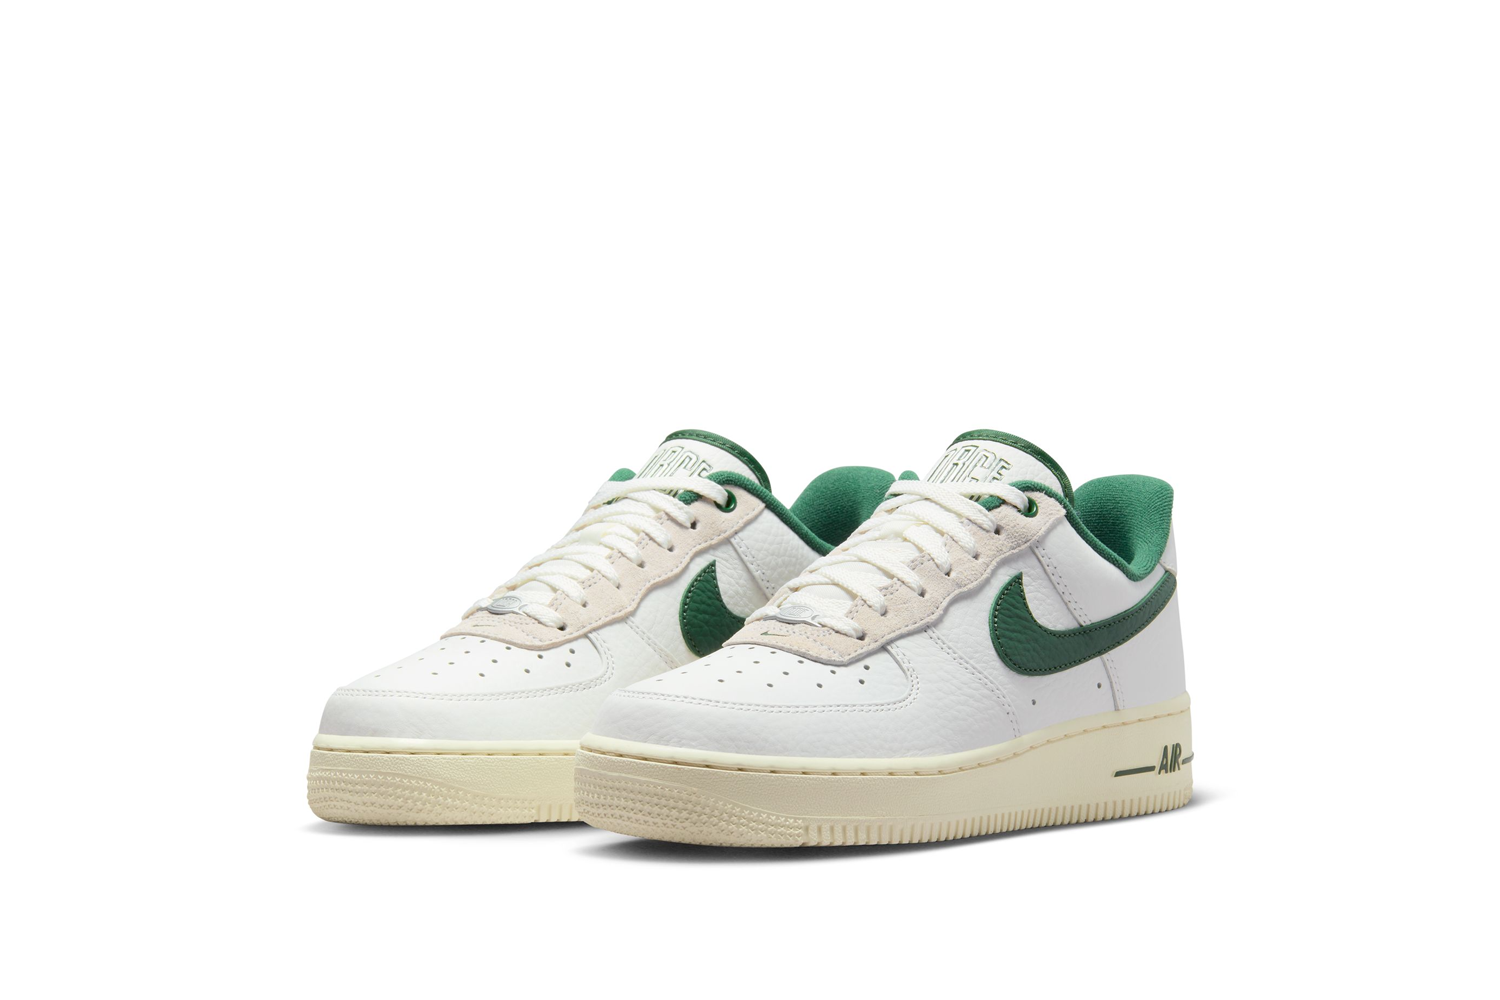 WOMEN'S AIR FORCE 1 '07 LX "COMMAND FORCE"